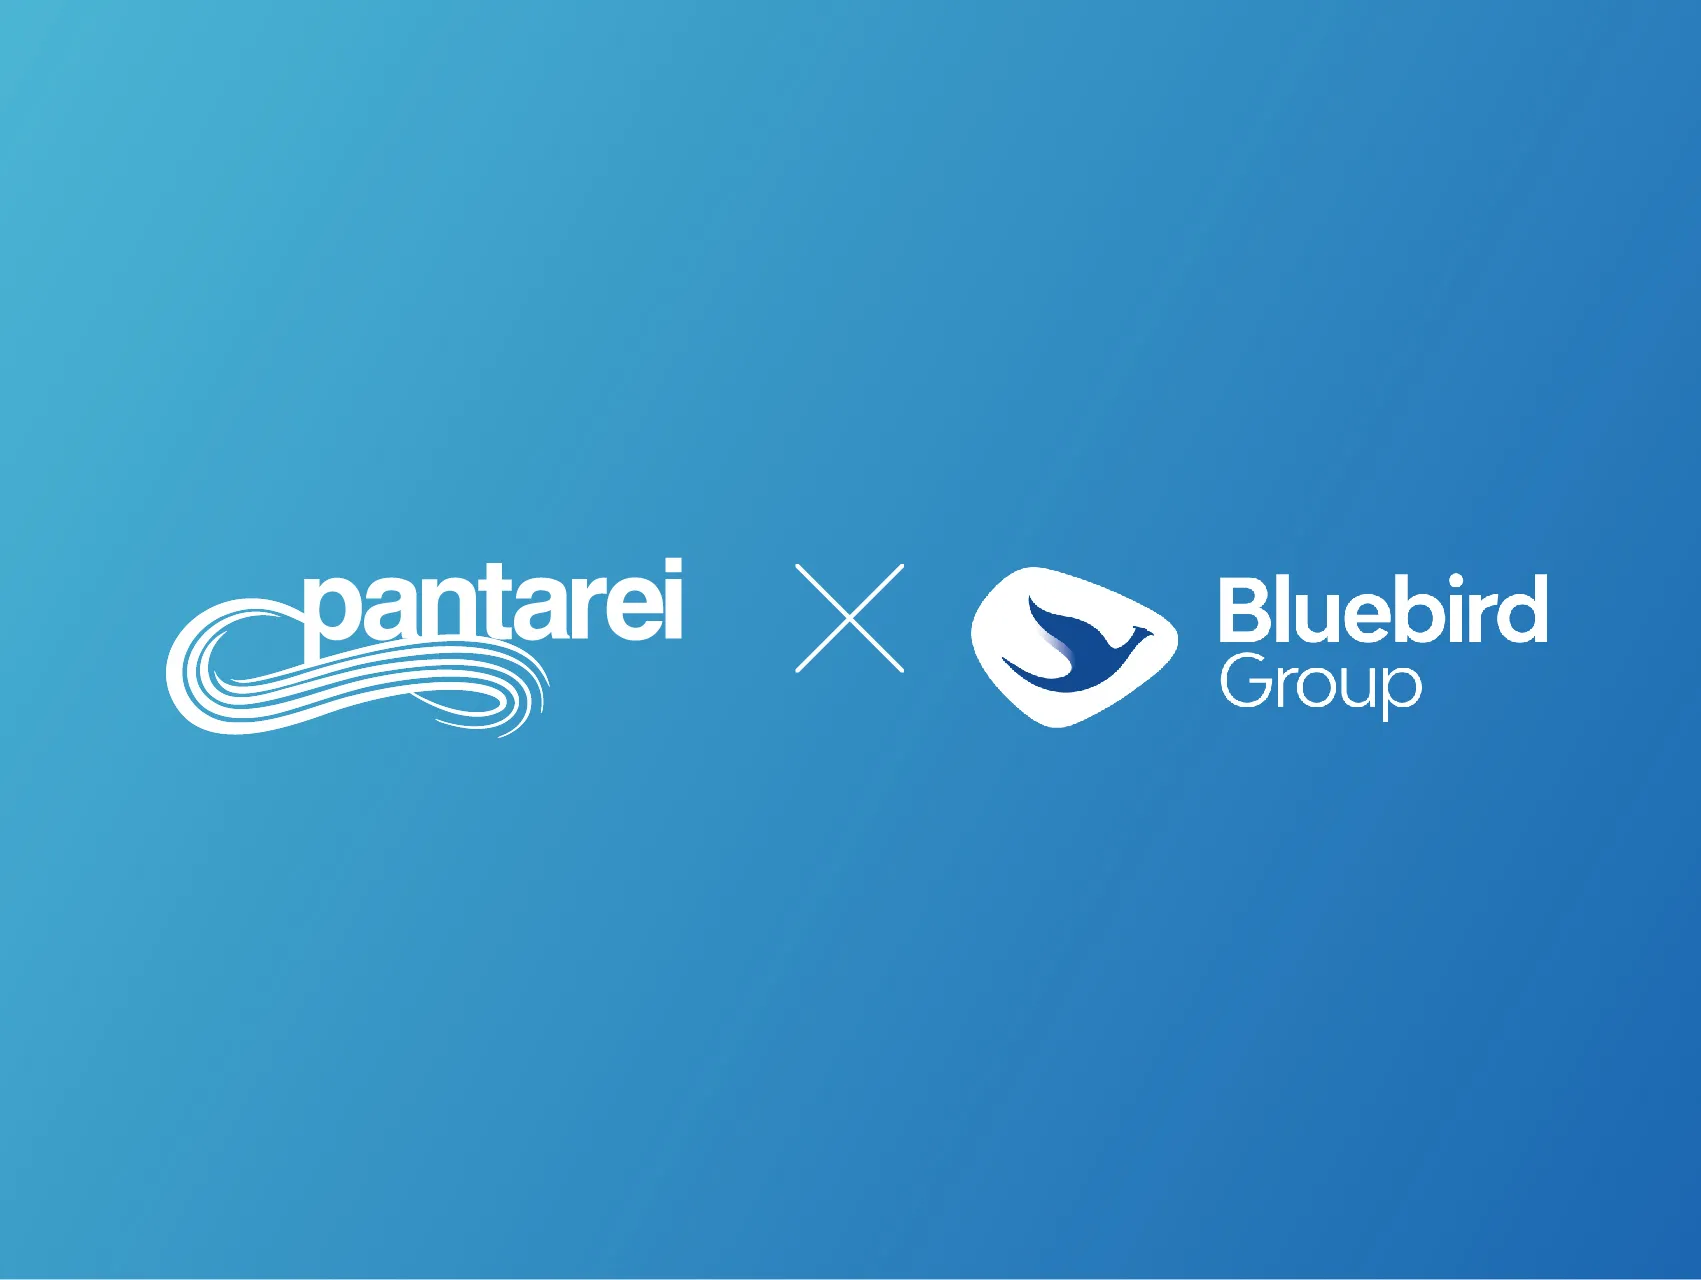 New Business: Bluebird Group is collaborating with Pantarei to support the iconic brand in staying relevant for Indonesias younger generations.